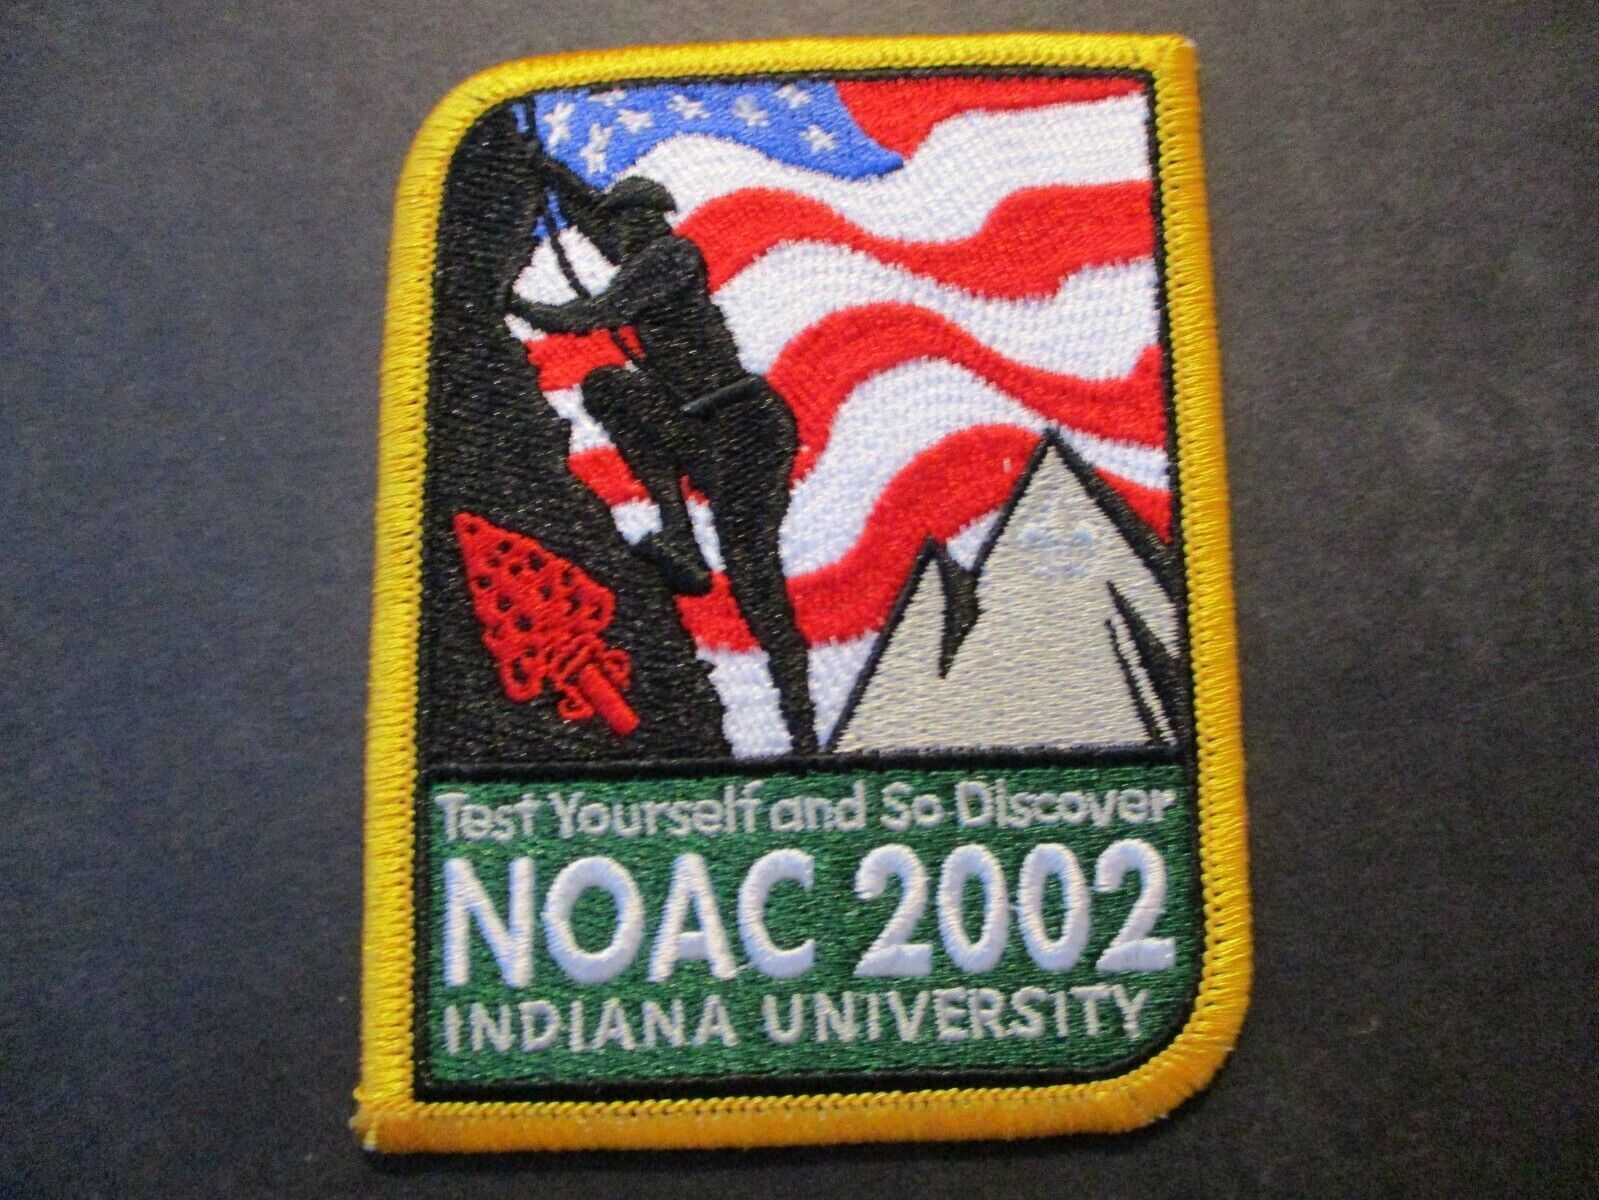 2002 Noac Test Yourself and So Discover Indiana University BSA boy scout patch